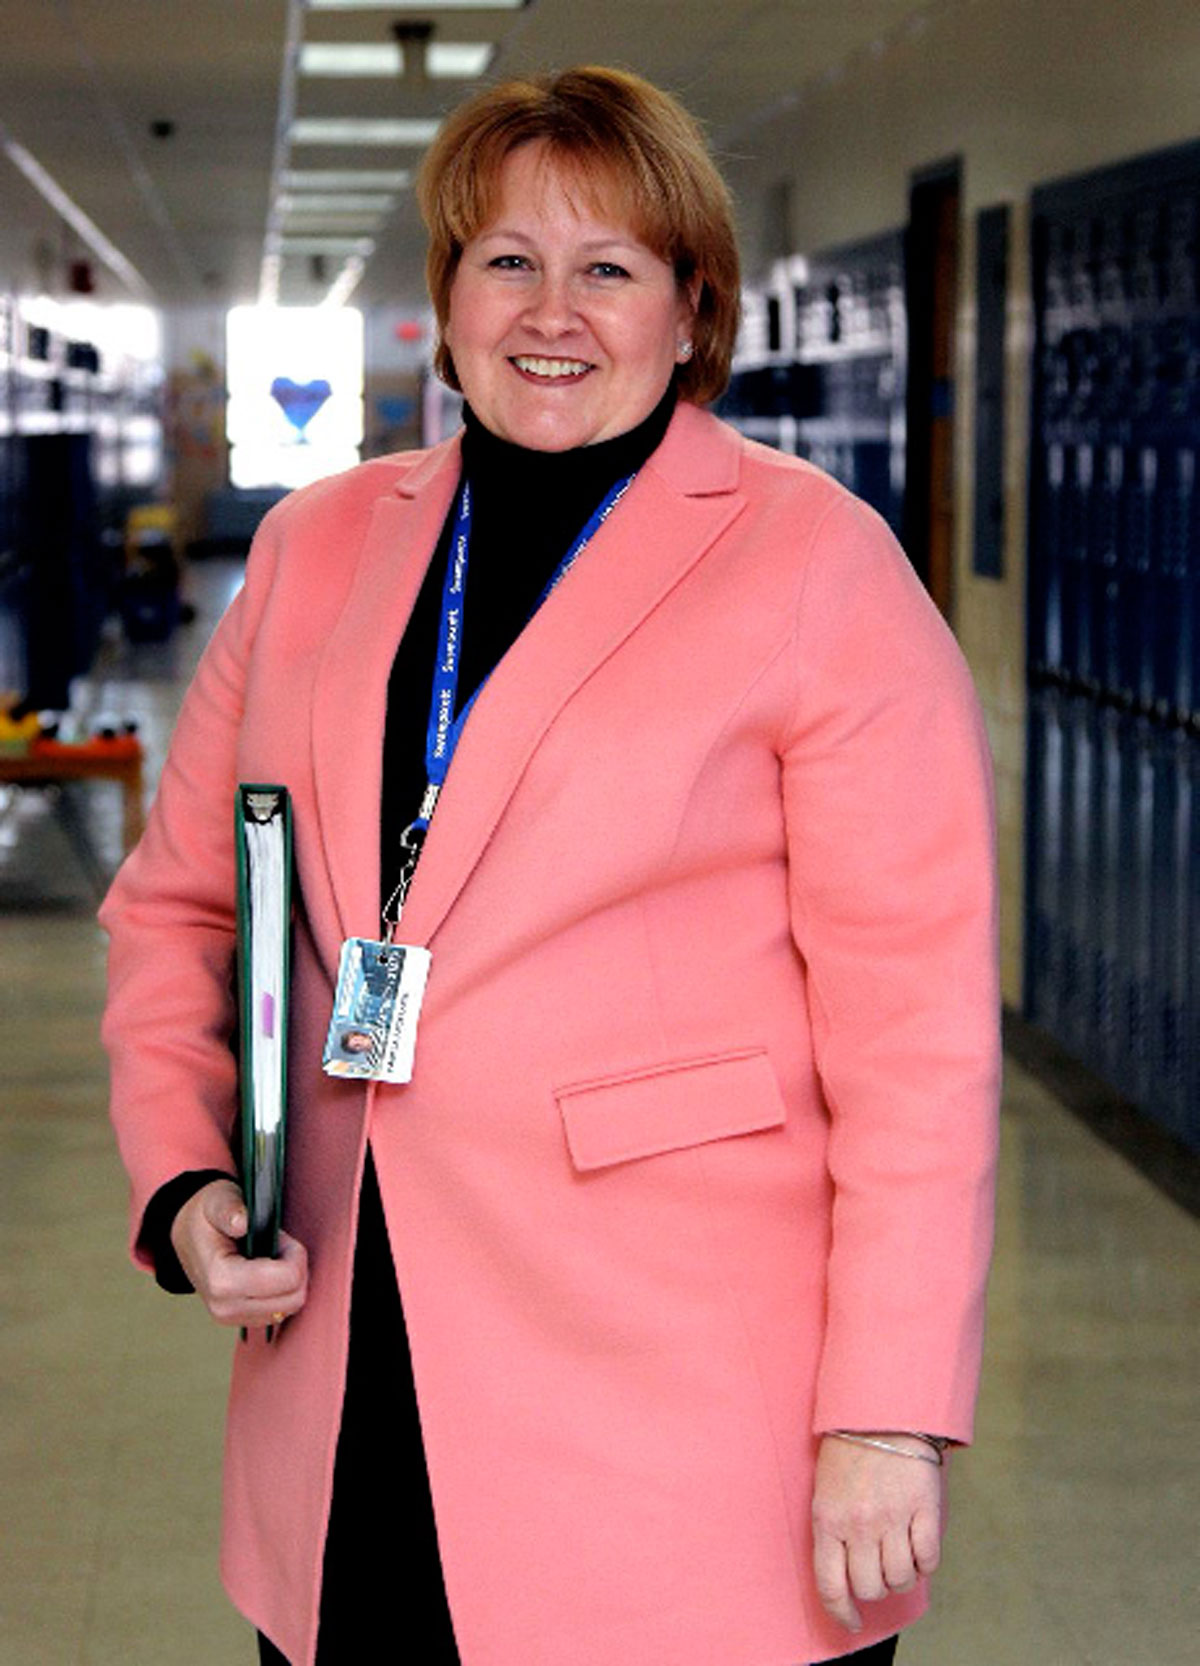 Superintendent Pamela Angelakis received high marks, marking her third final evaluation. She’ll be entering into the fourth year of her five-year contract as superintendent.